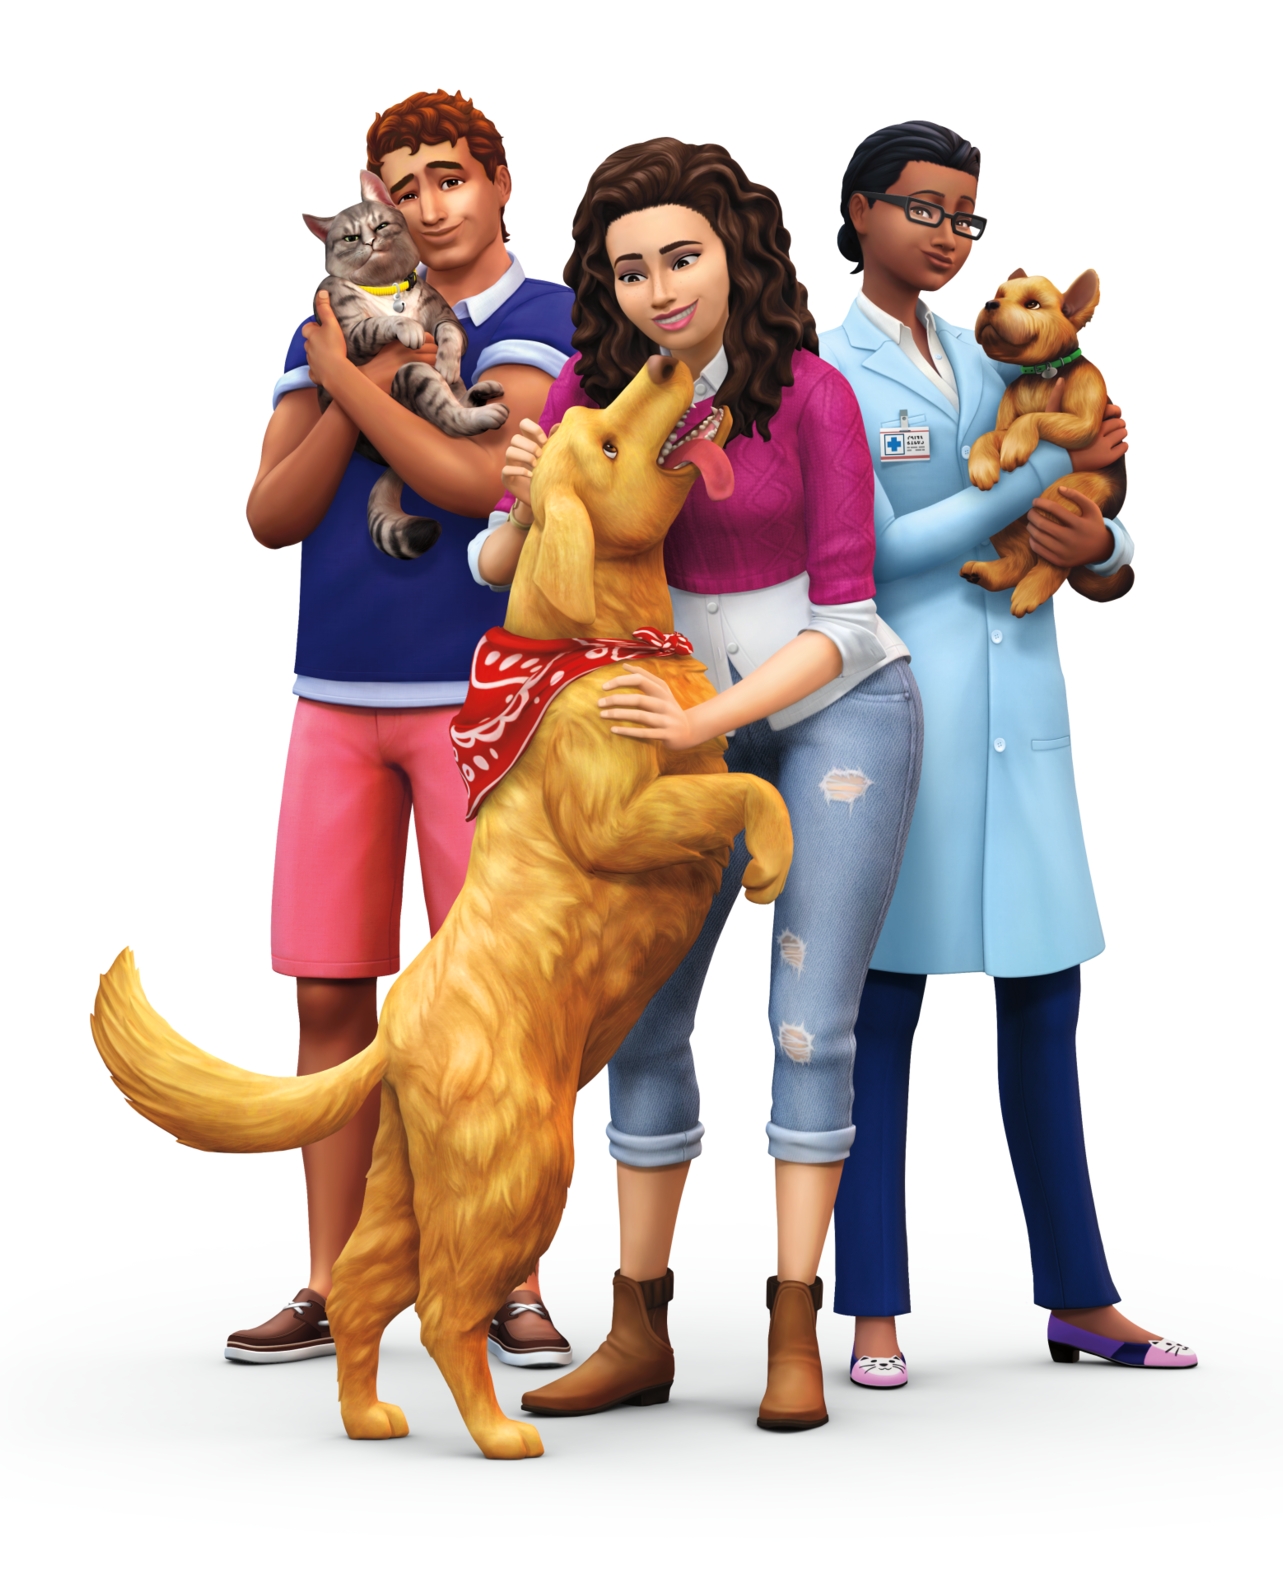 in the Cats and Dogs DLC